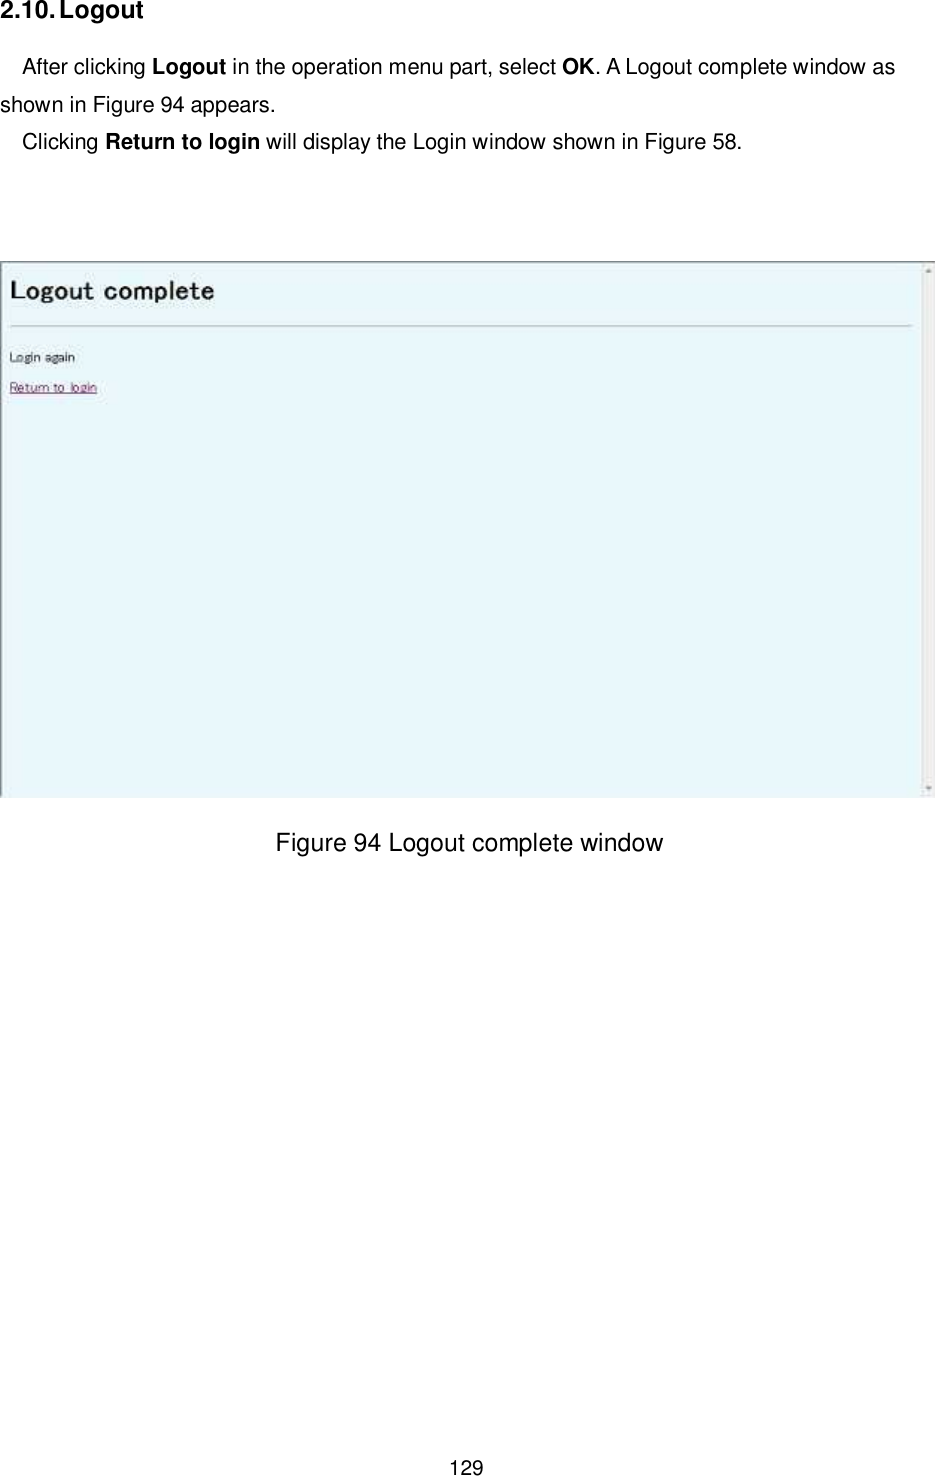    129  2.10. Logout After clicking Logout in the operation menu part, select OK. A Logout complete window as shown in Figure 94 appears. Clicking Return to login will display the Login window shown in Figure 58.    Figure 94 Logout complete window               